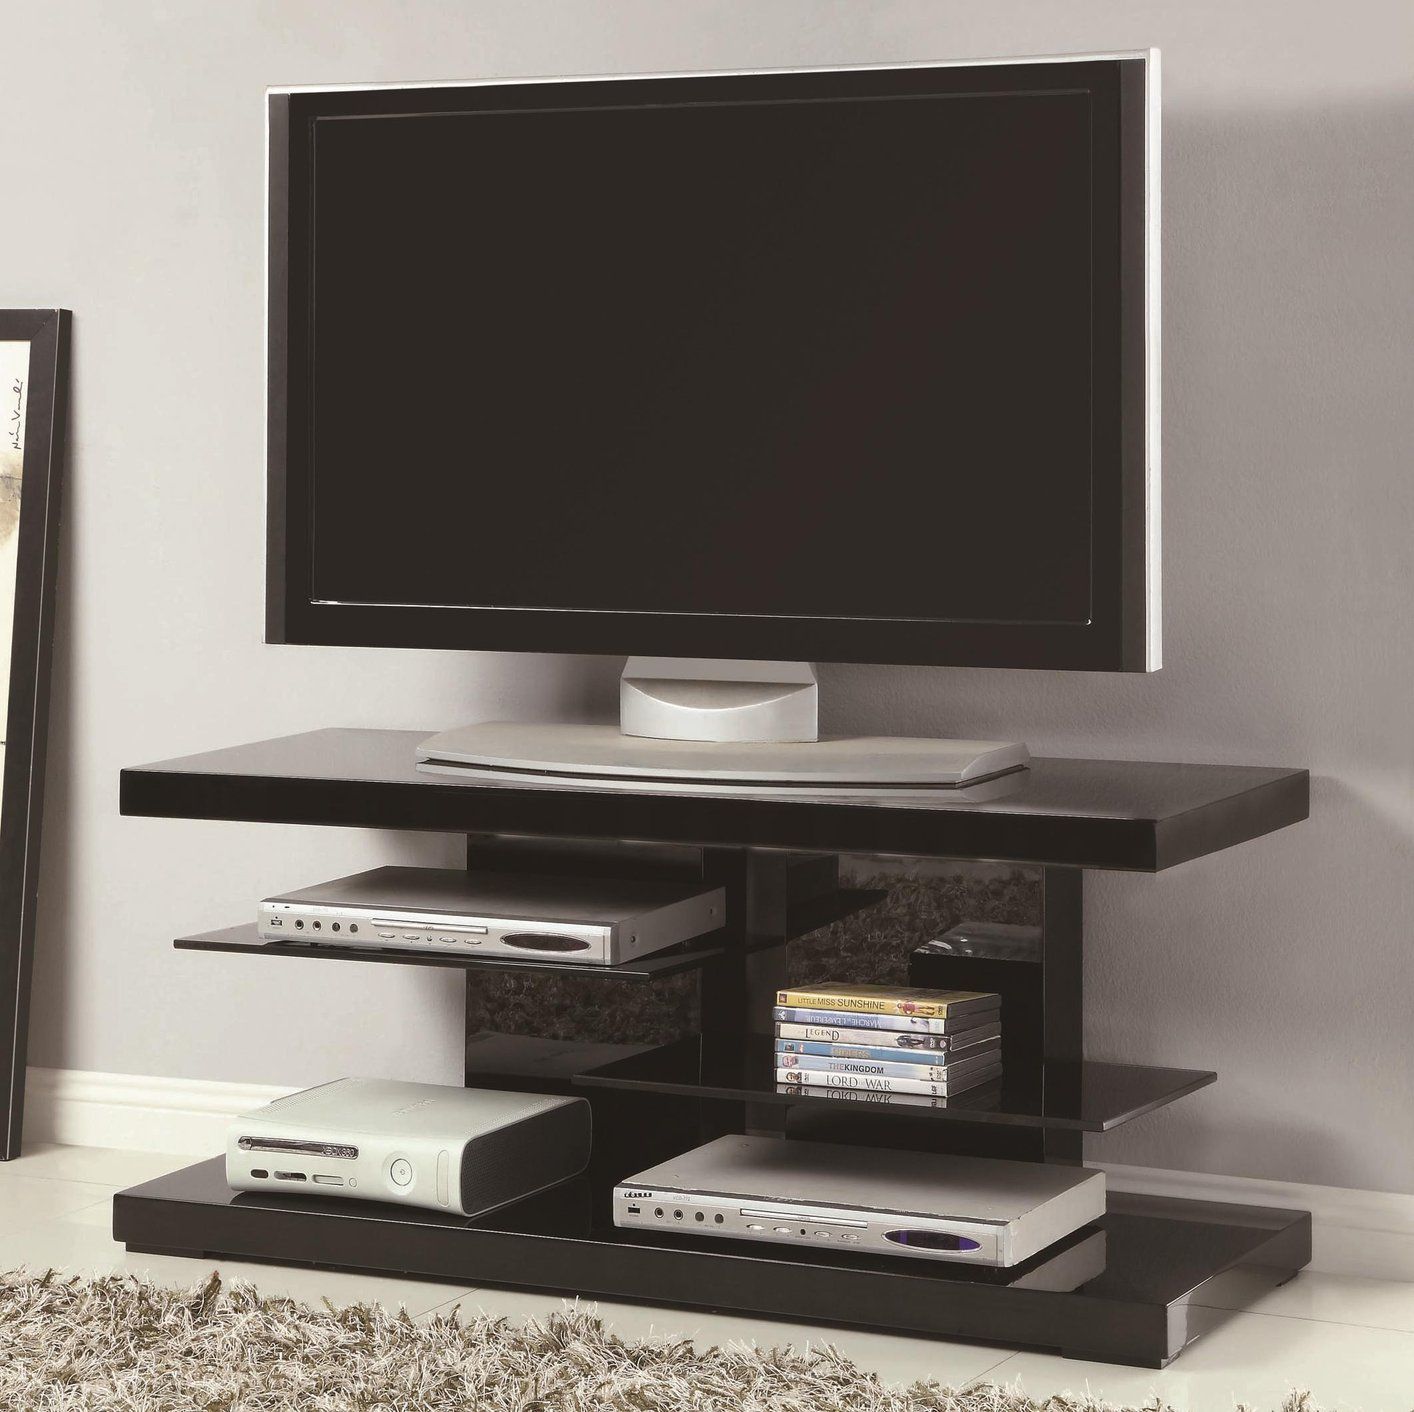 Black Glass Tv Stand – Steal A Sofa Furniture Outlet Los Regarding Modern Black Floor Glass Tv Stands With Mount (View 4 of 15)